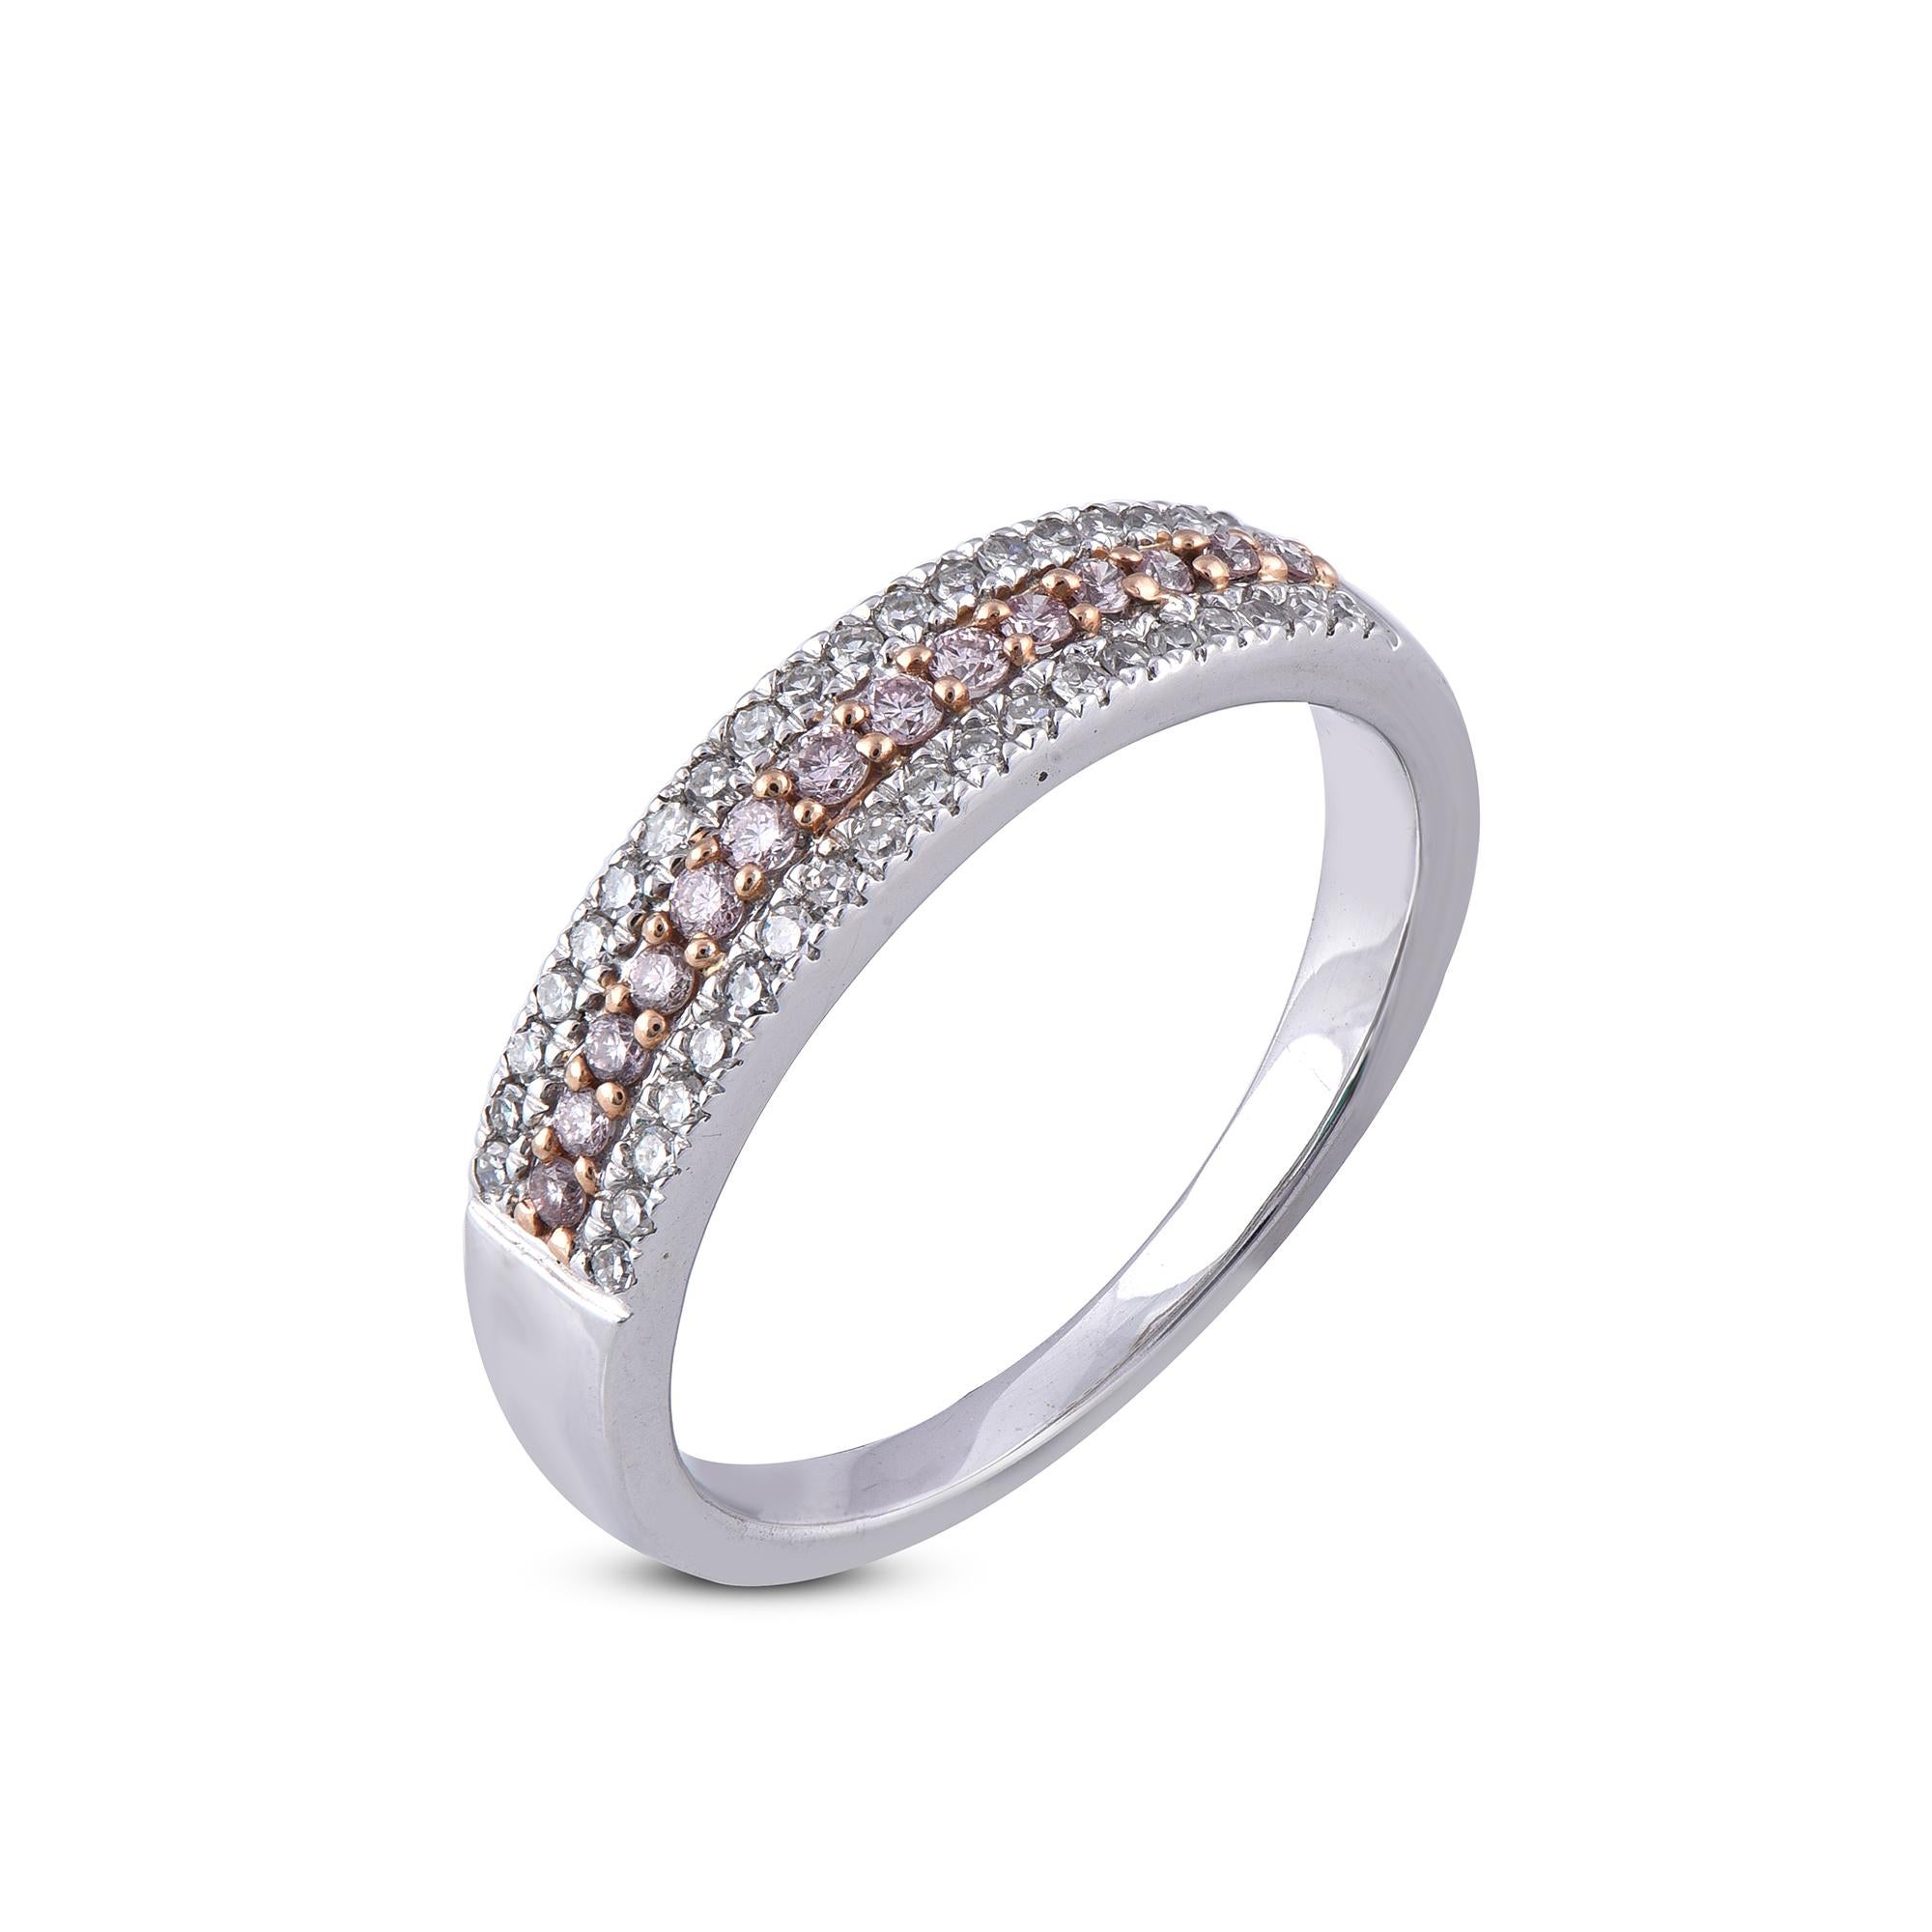 Truly exquisite, this  triple row wide diamond band ring is sure to be admired for the inherent classic beauty and elegance within its design. The total weight of diamonds 0.33 carat, H-I color, I1 Clarity. This ring is beautifully crafted in 18K